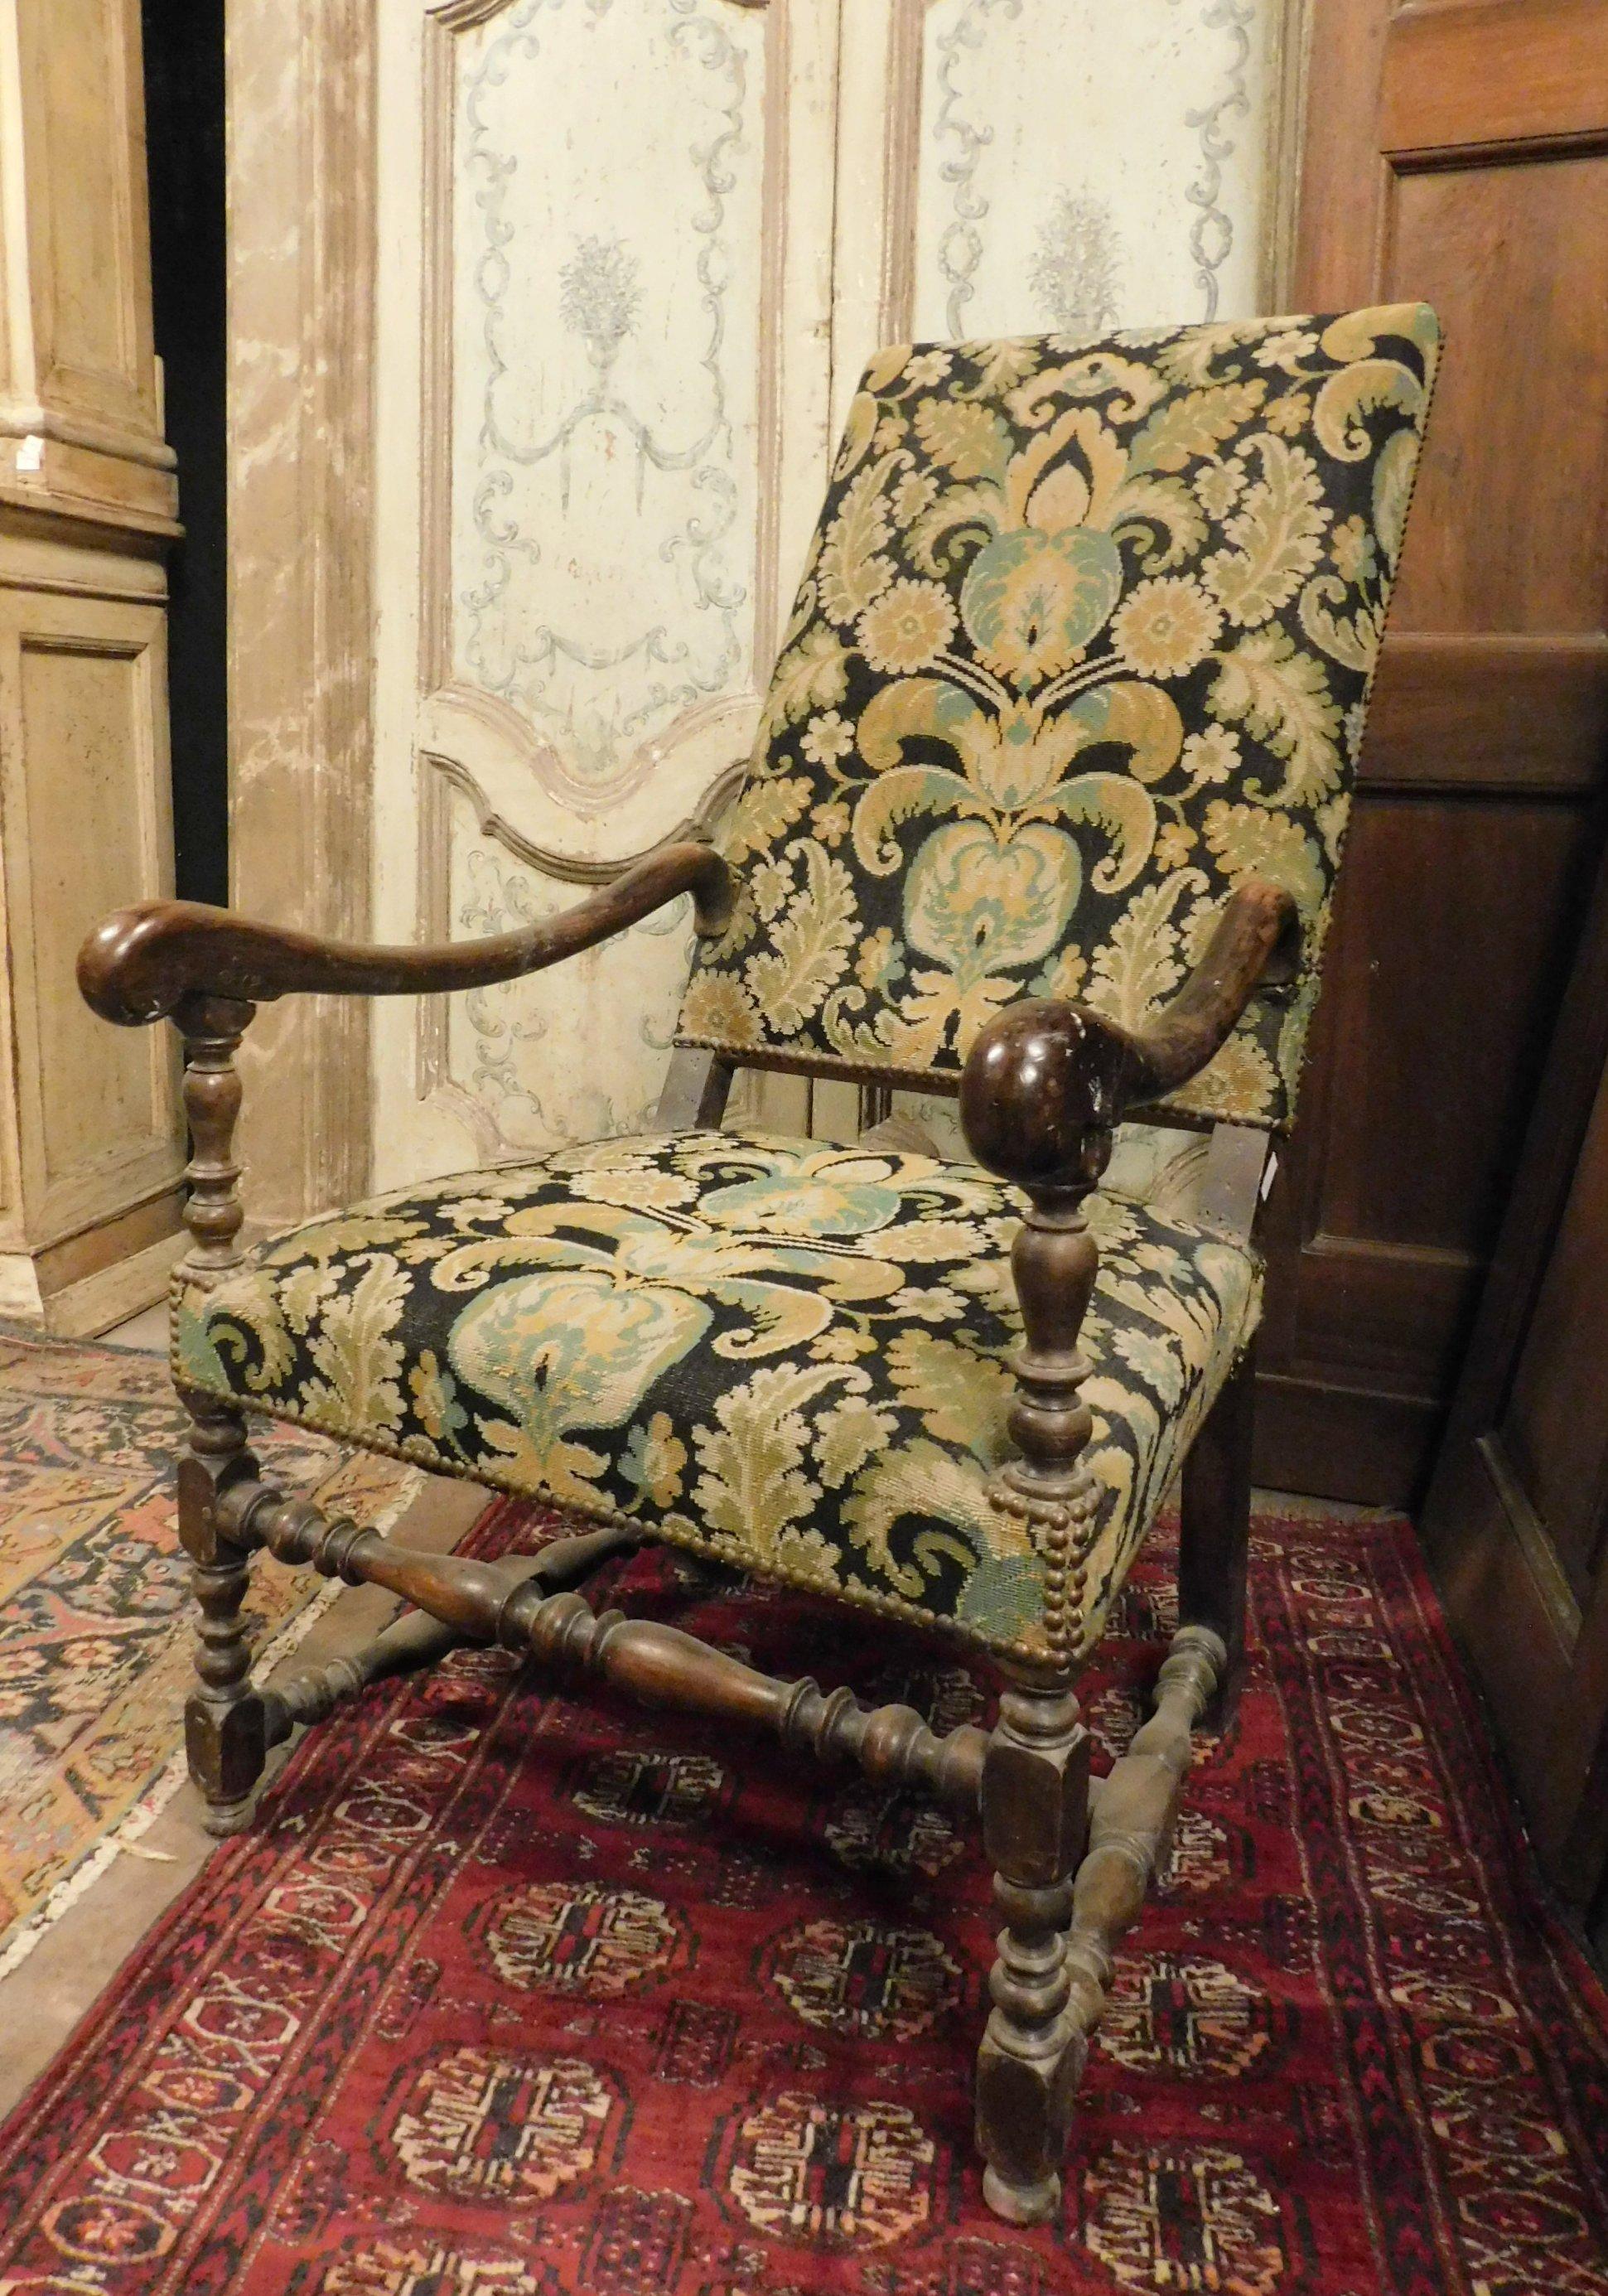 Set of 2 very ancient armchairs, completely hand carved in precious walnut wood, built with the spool method, Louis XIV style, with brocade fabric on black and green tones, original and in excellent condition, built in the 1600 for important palace